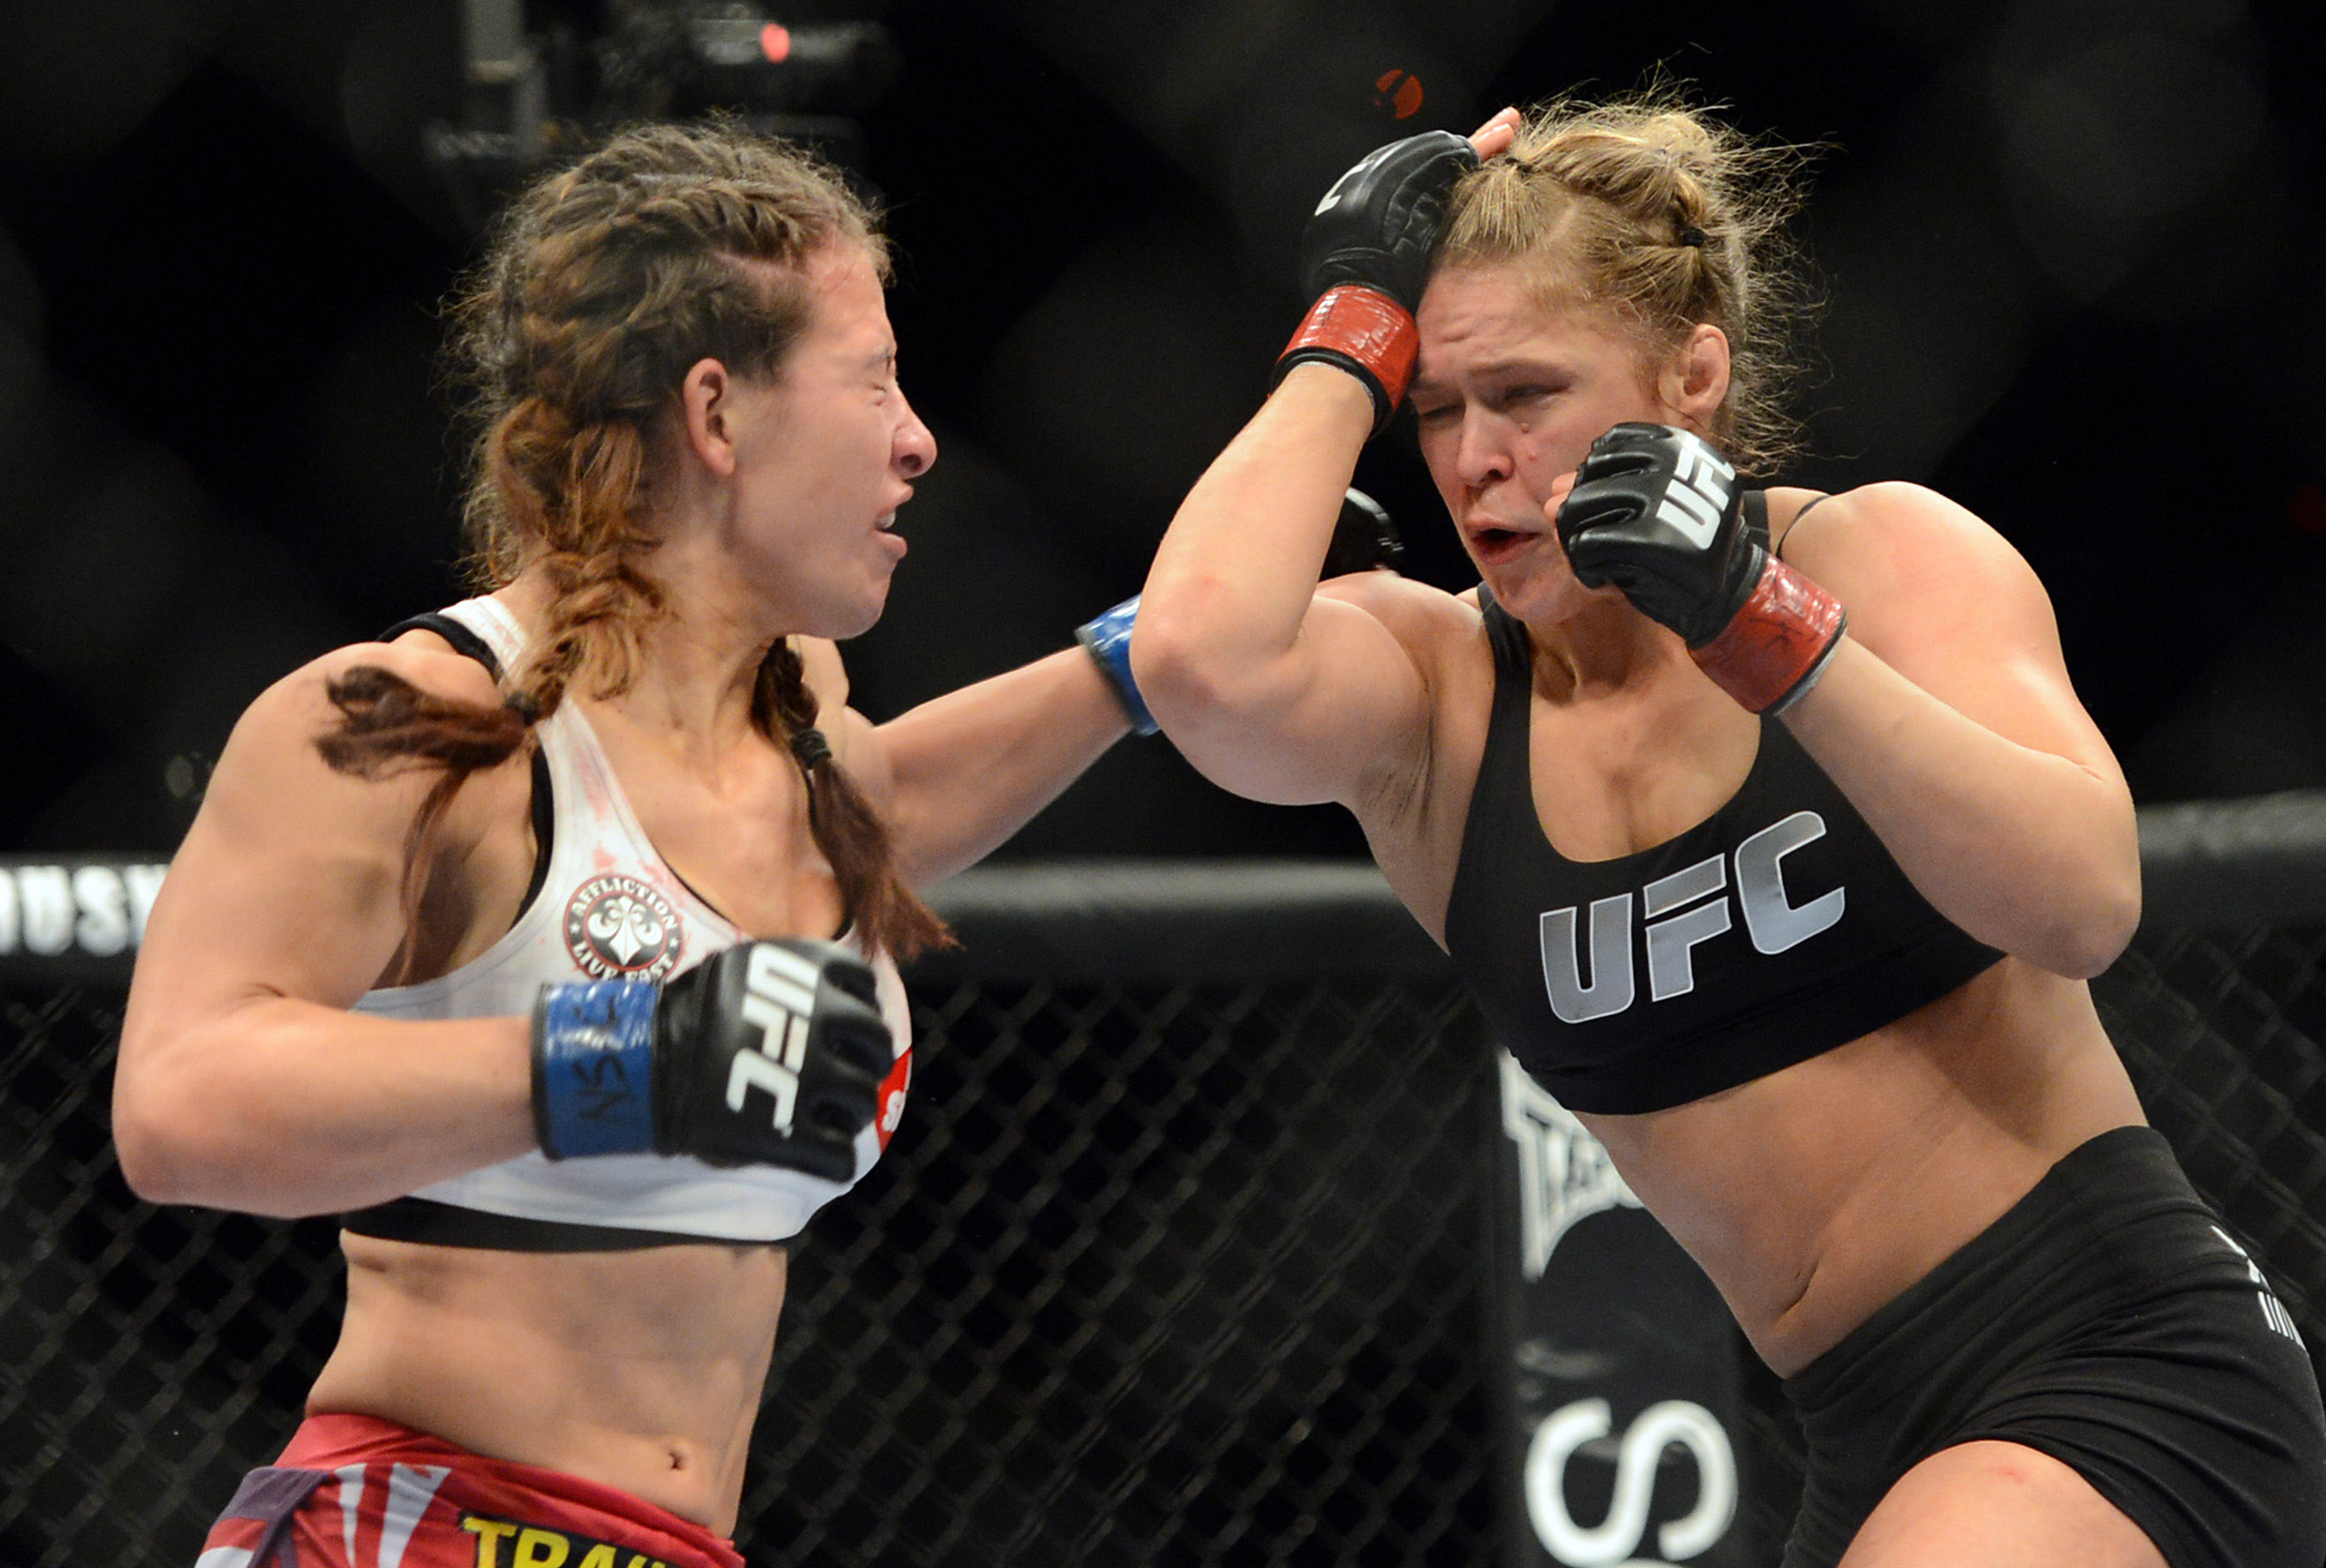 Ronda Rousey (red gloves) and Miesha Tate (blue gloves) fight during the UFC women's bantamweight championship bout at the MGM Grand Garden Arena in Las Vegas on Dec. 28, 2013. (USA Today Sports/Reuters)